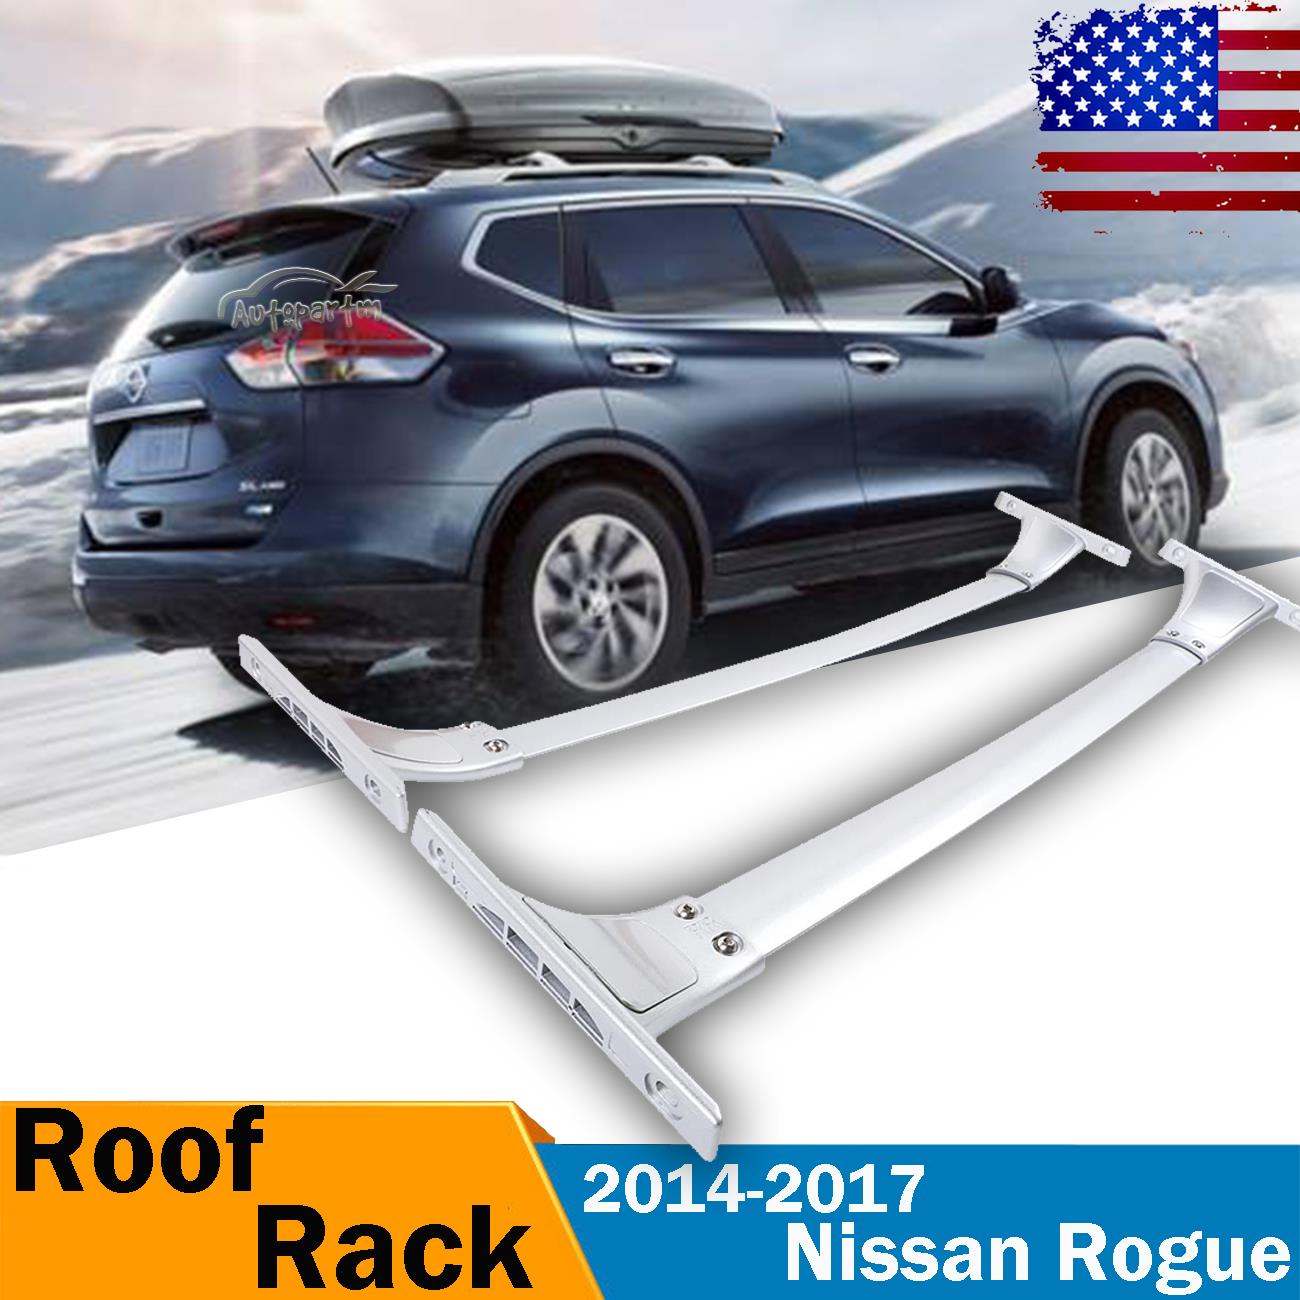 FOR 14-17 NISSAN ROGUE OE FACTORY STYLE ROOF RACK RAILS CROSS BARS CARGO CARRIER | eBay 2015 Nissan Rogue Select Roof Cross Bars